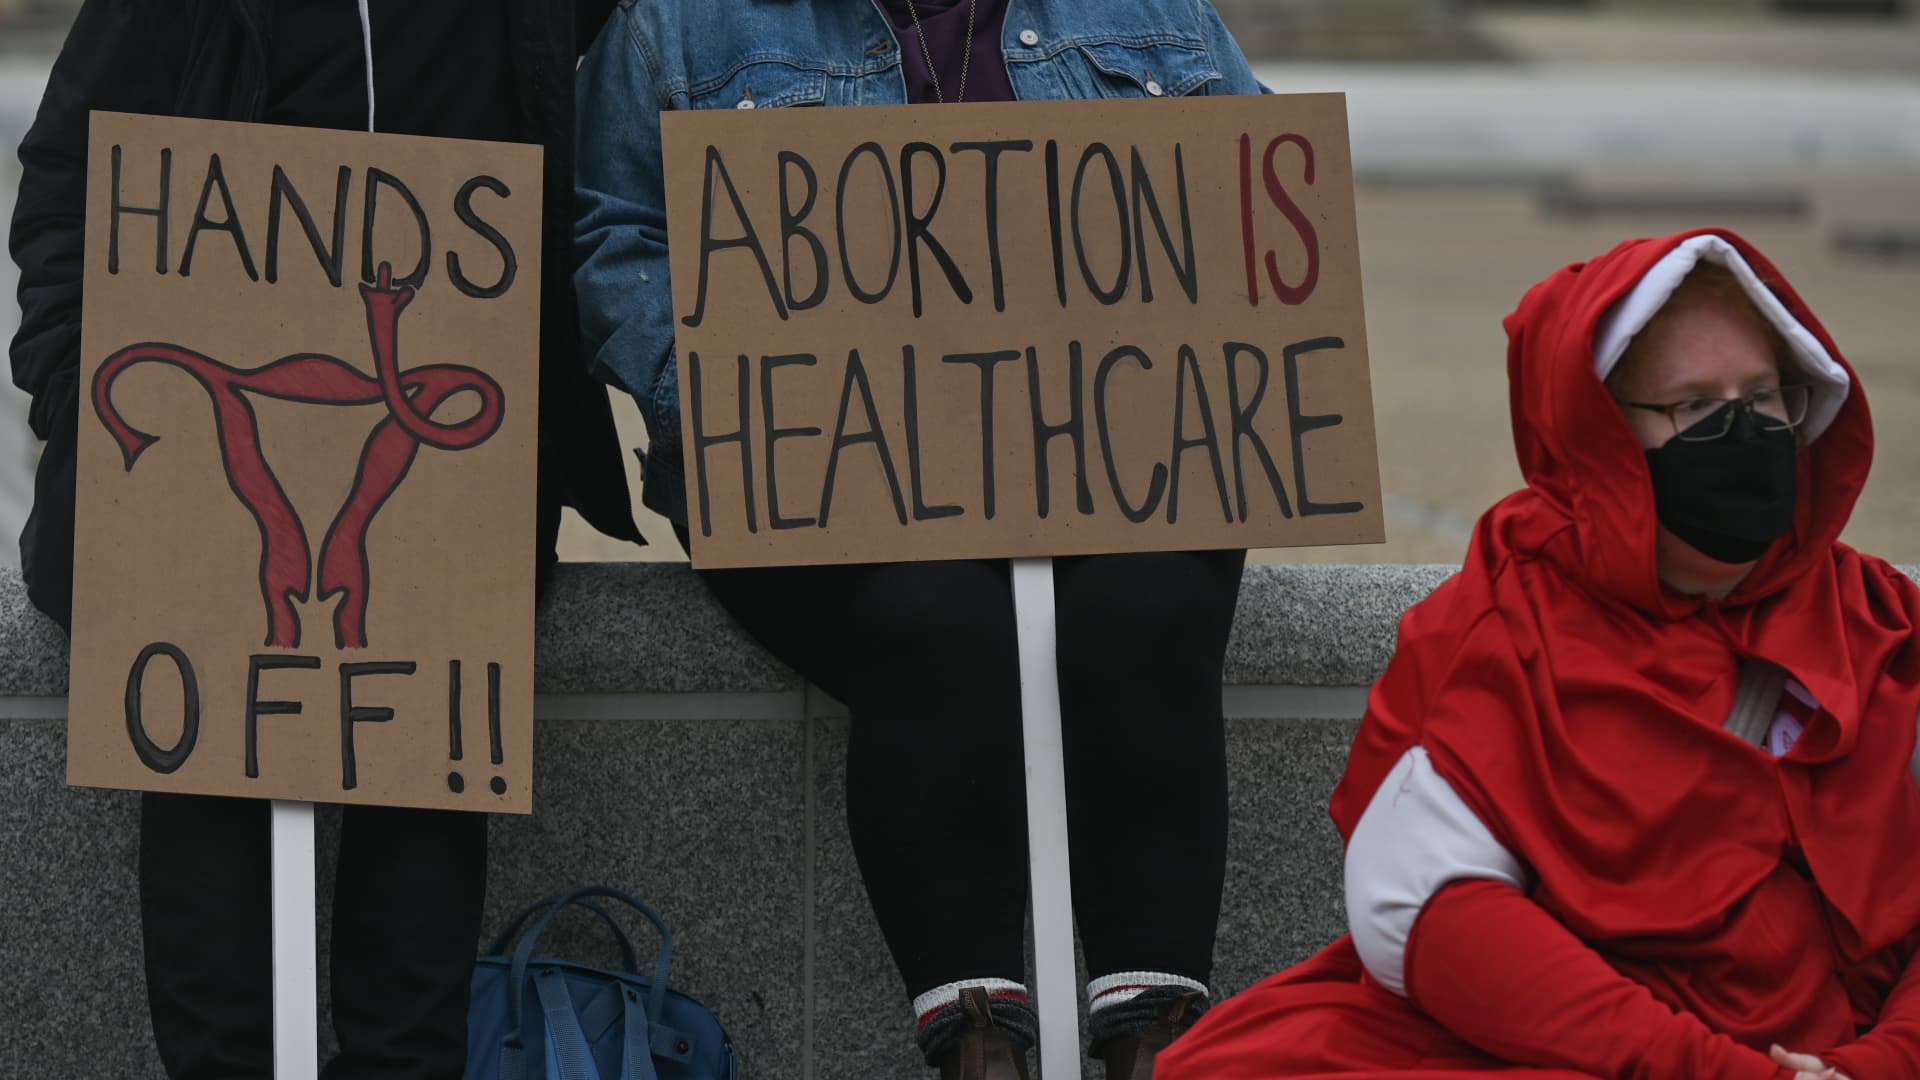 55% of Americans say they are ‘pro-choice,’ most since ’95